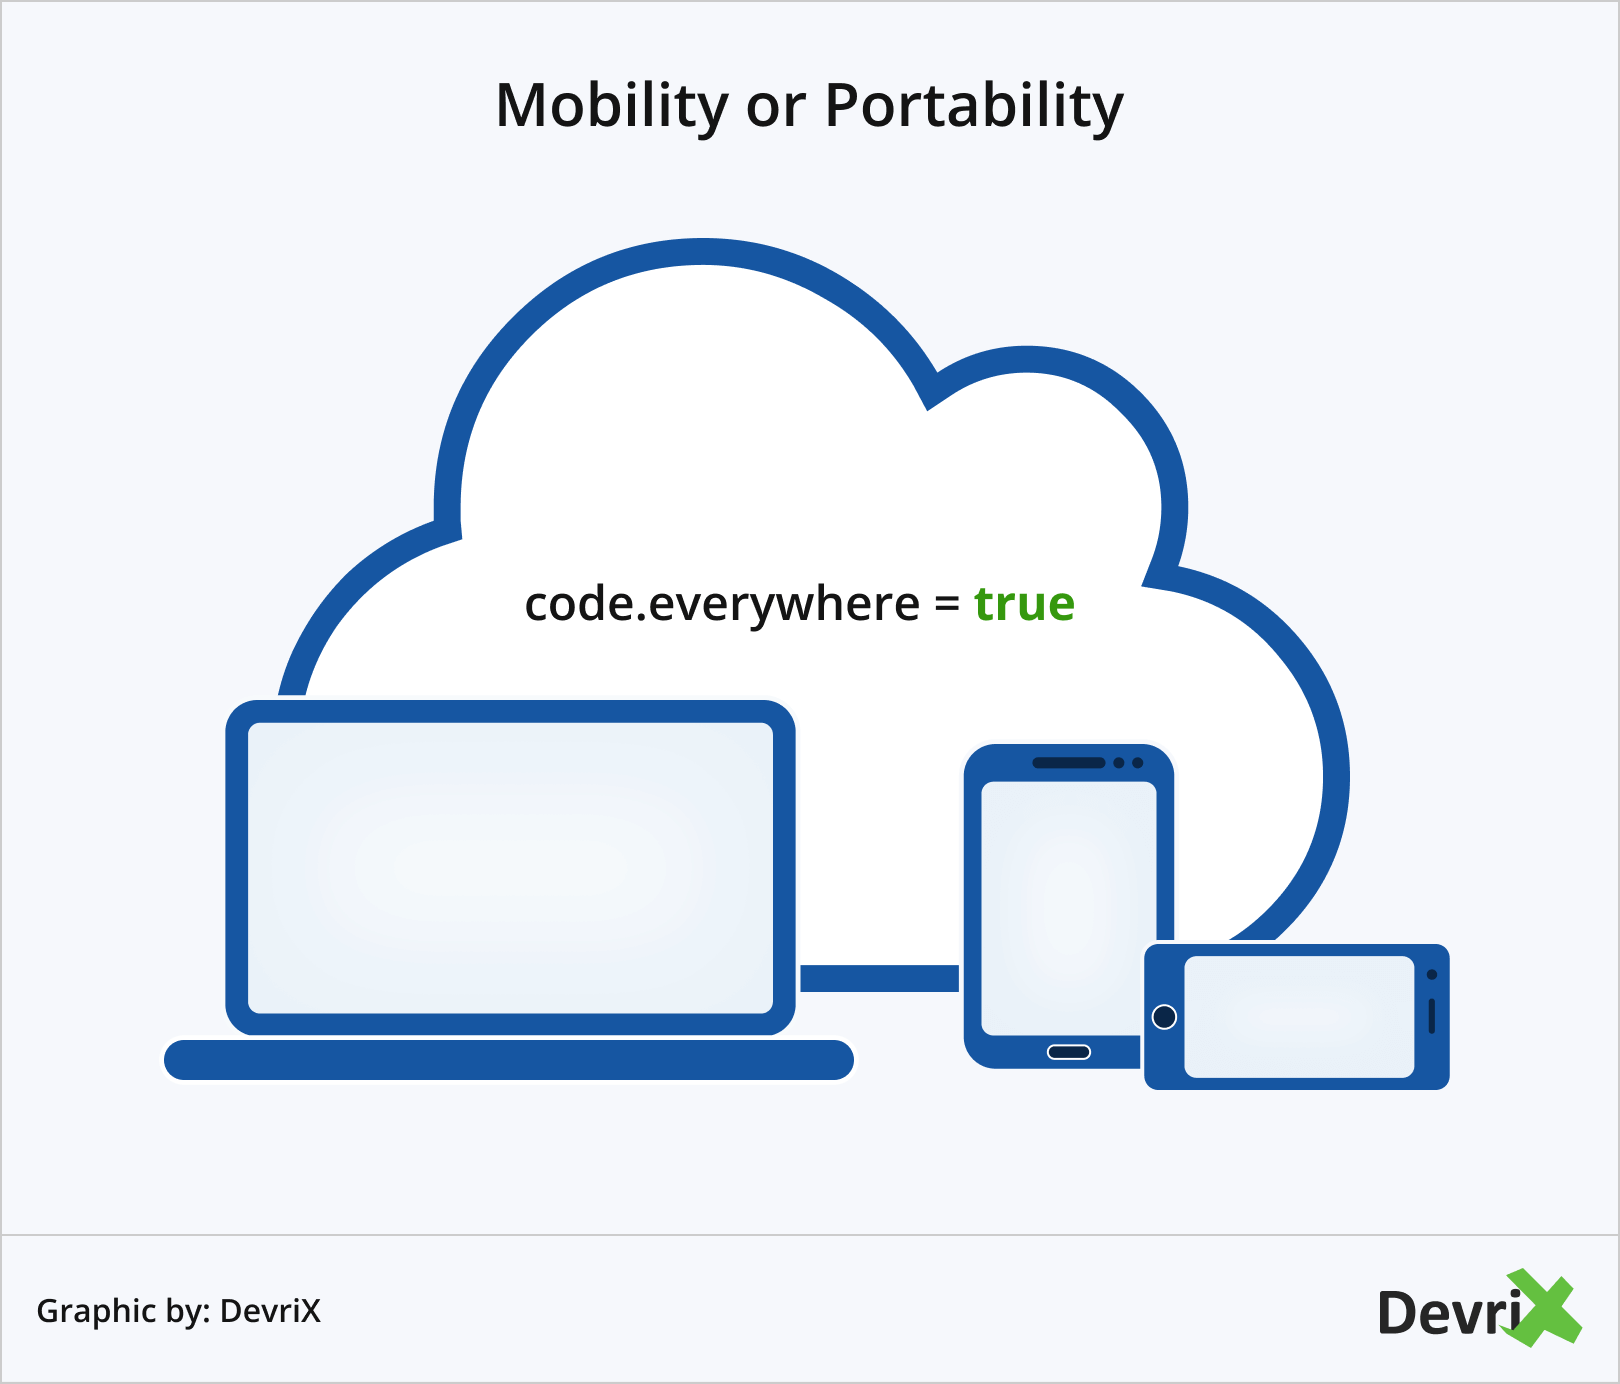 Mobility or Portability